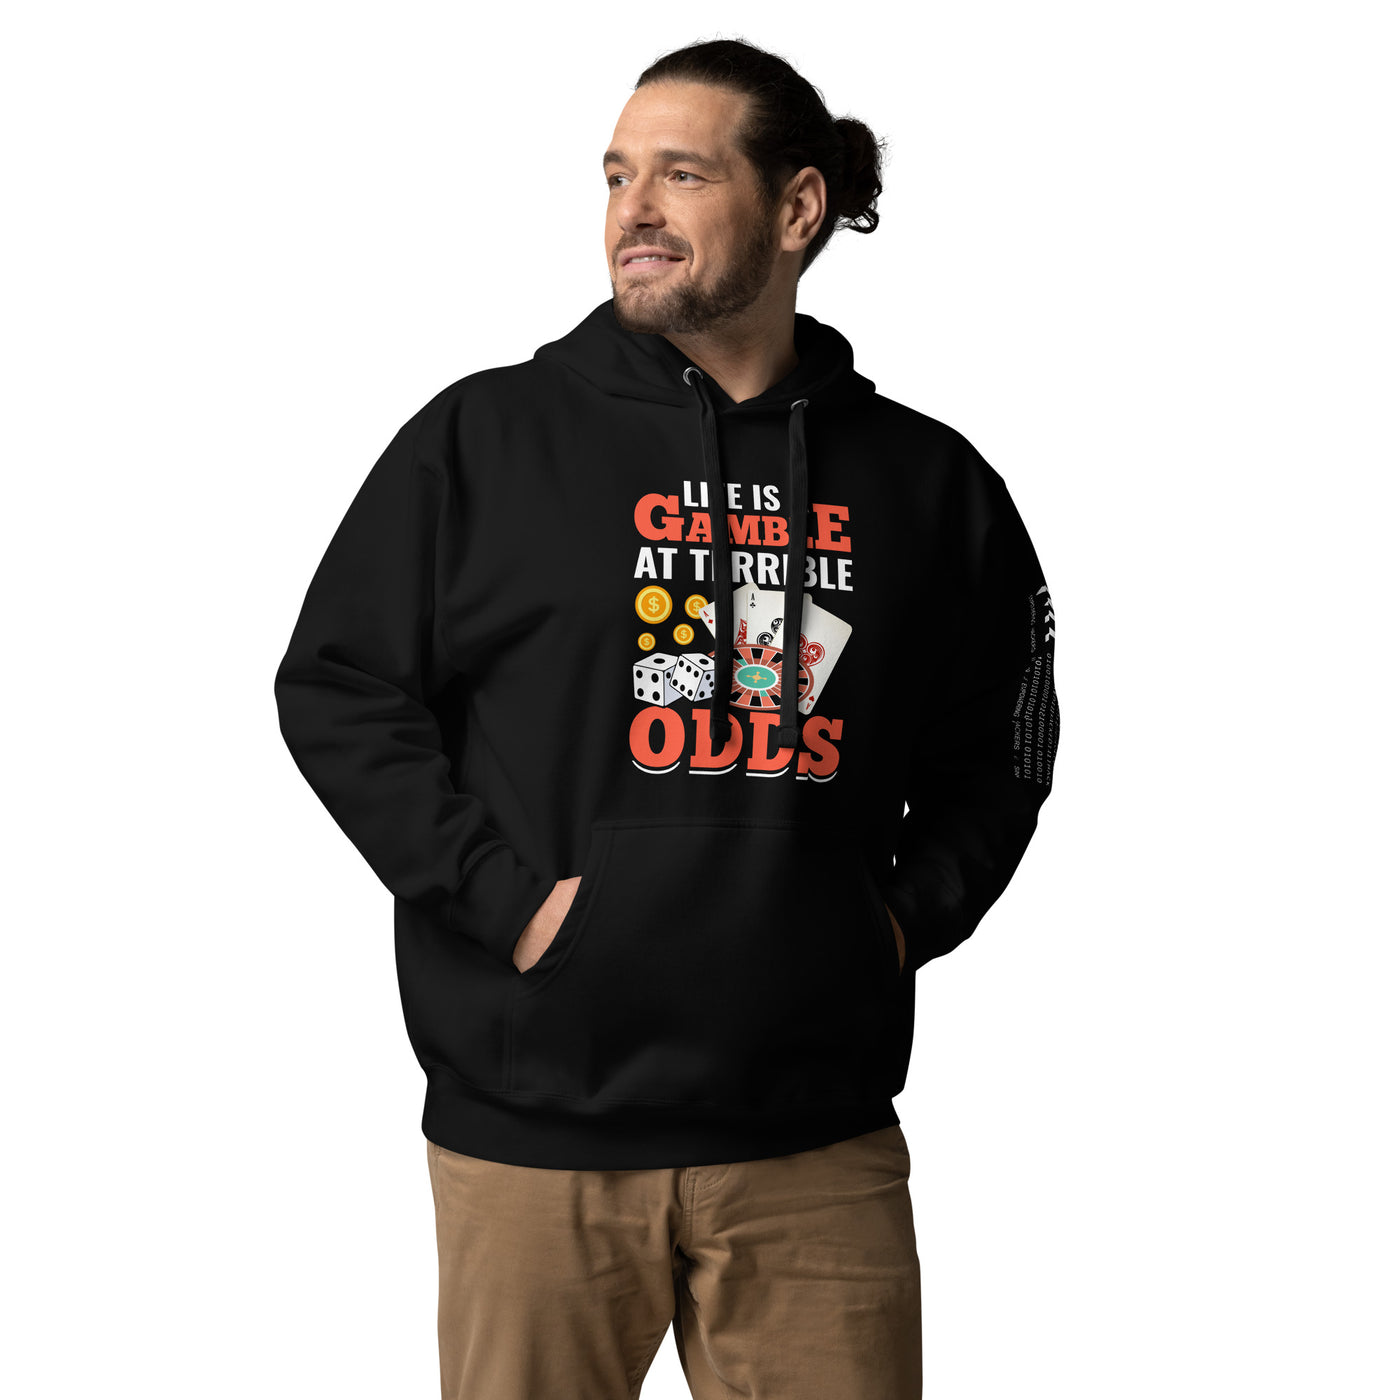 Life is a Gamble at terrible Odds - Unisex Hoodie